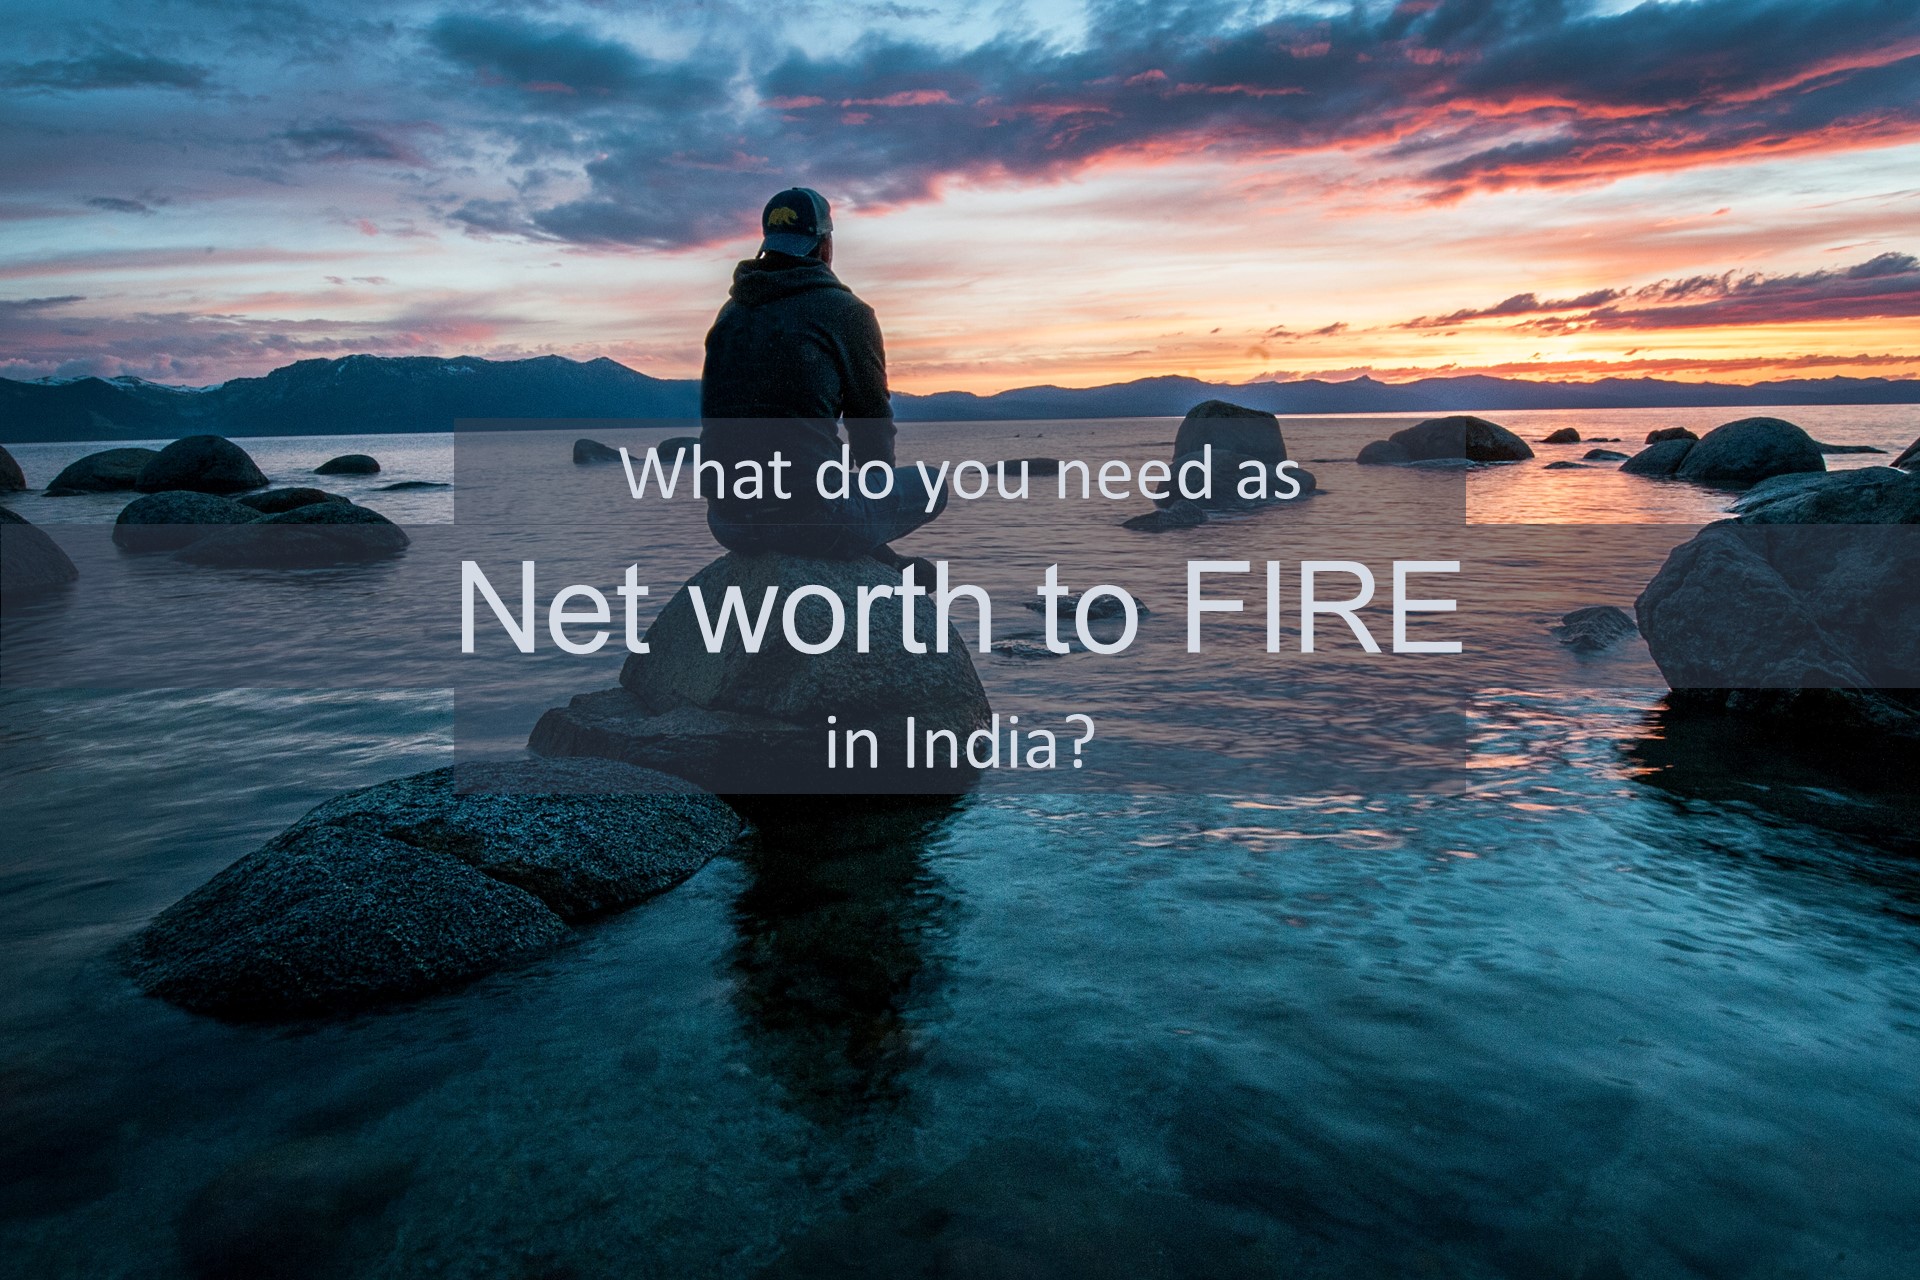 <p>A Step-by-step guide for finding out how much money you need to FIRE in India.</p>

